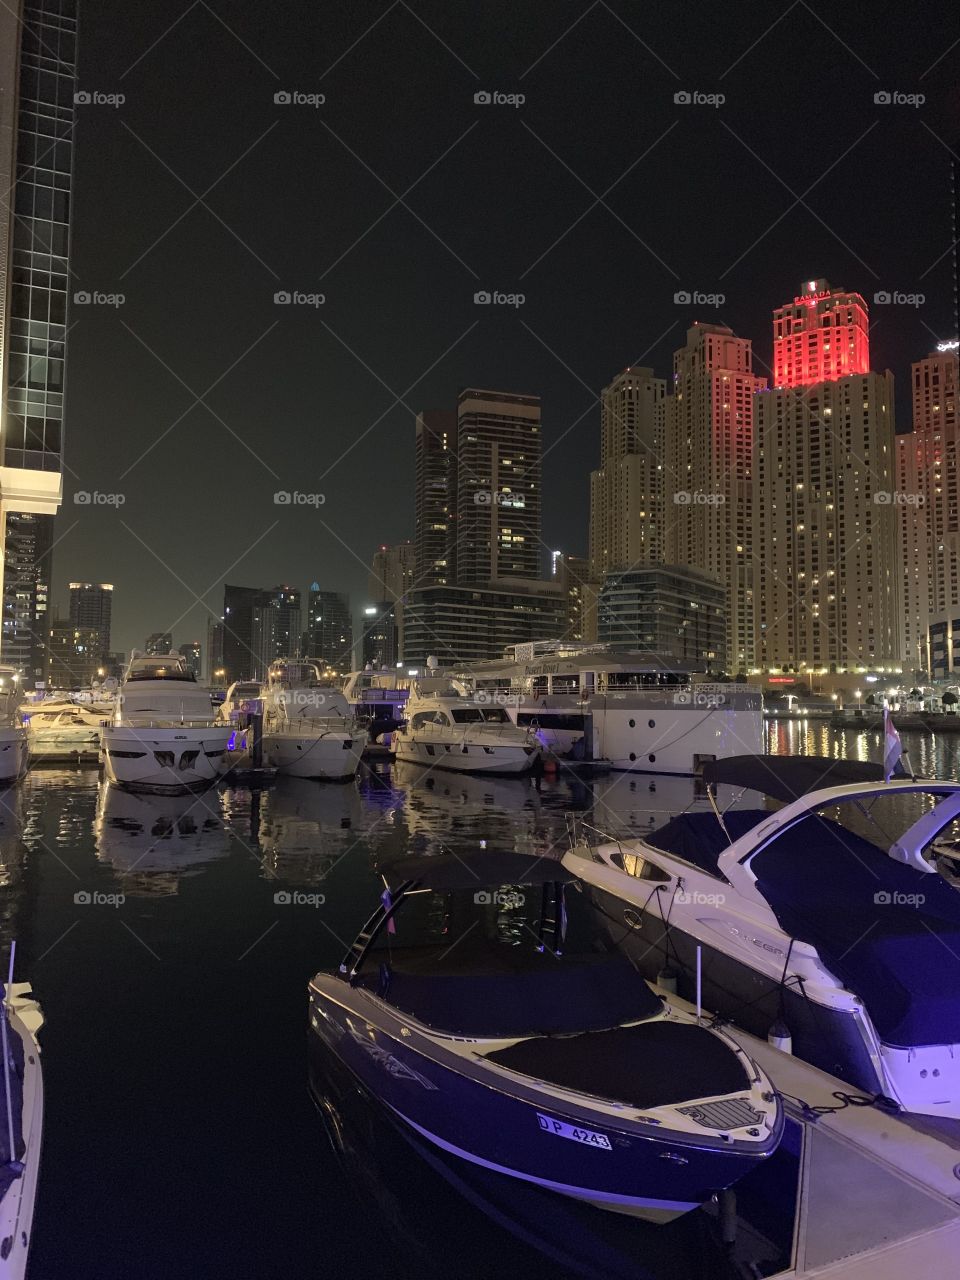 The best background for white is always night. The most bright light you can see at night. Expensive and сhic Dubai Marina promenade.